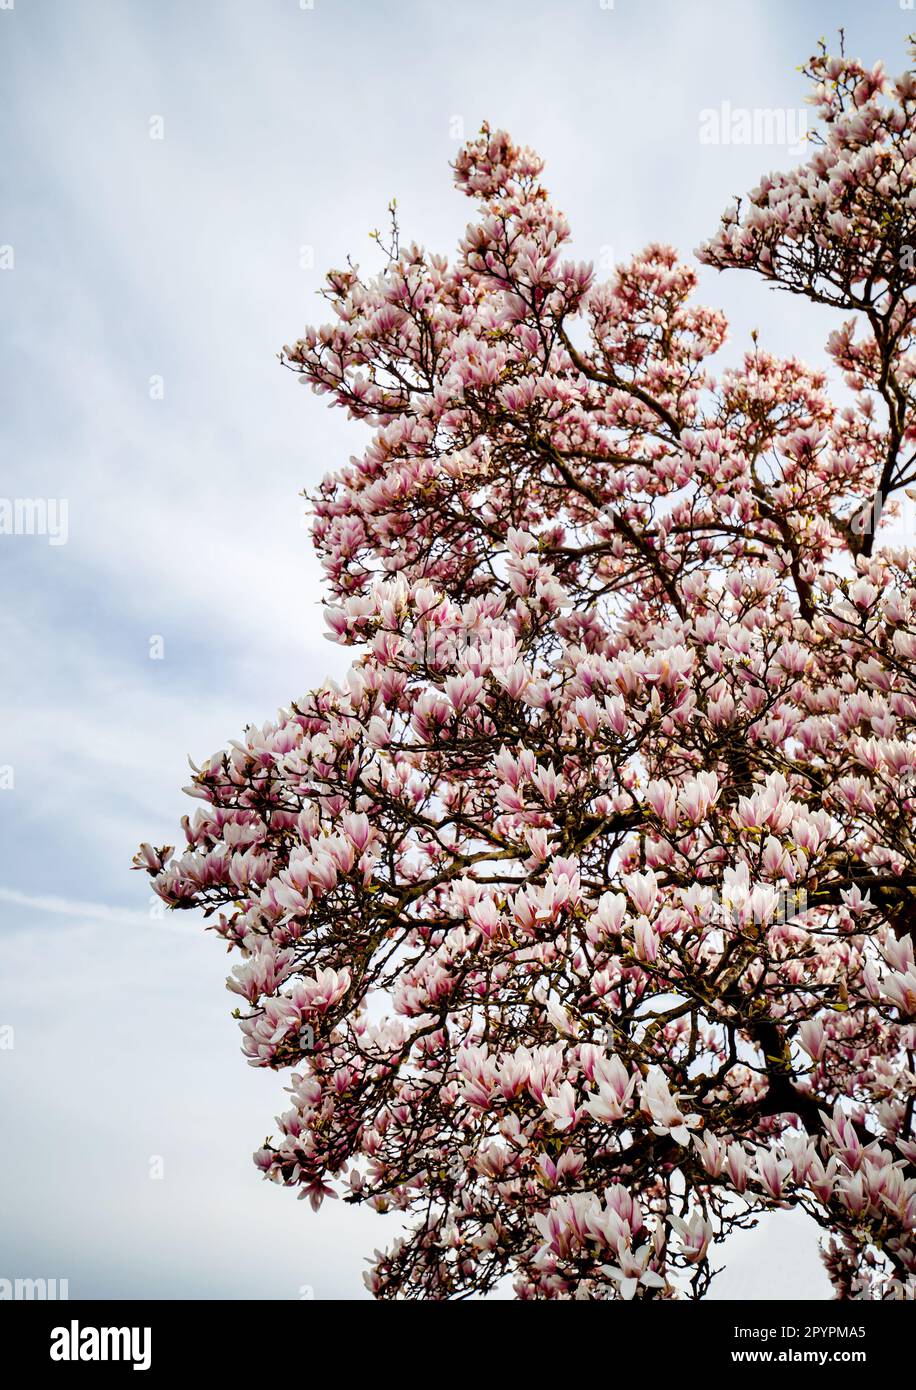 Fully bloomed many magnolia flowers in a tree Stock Photo